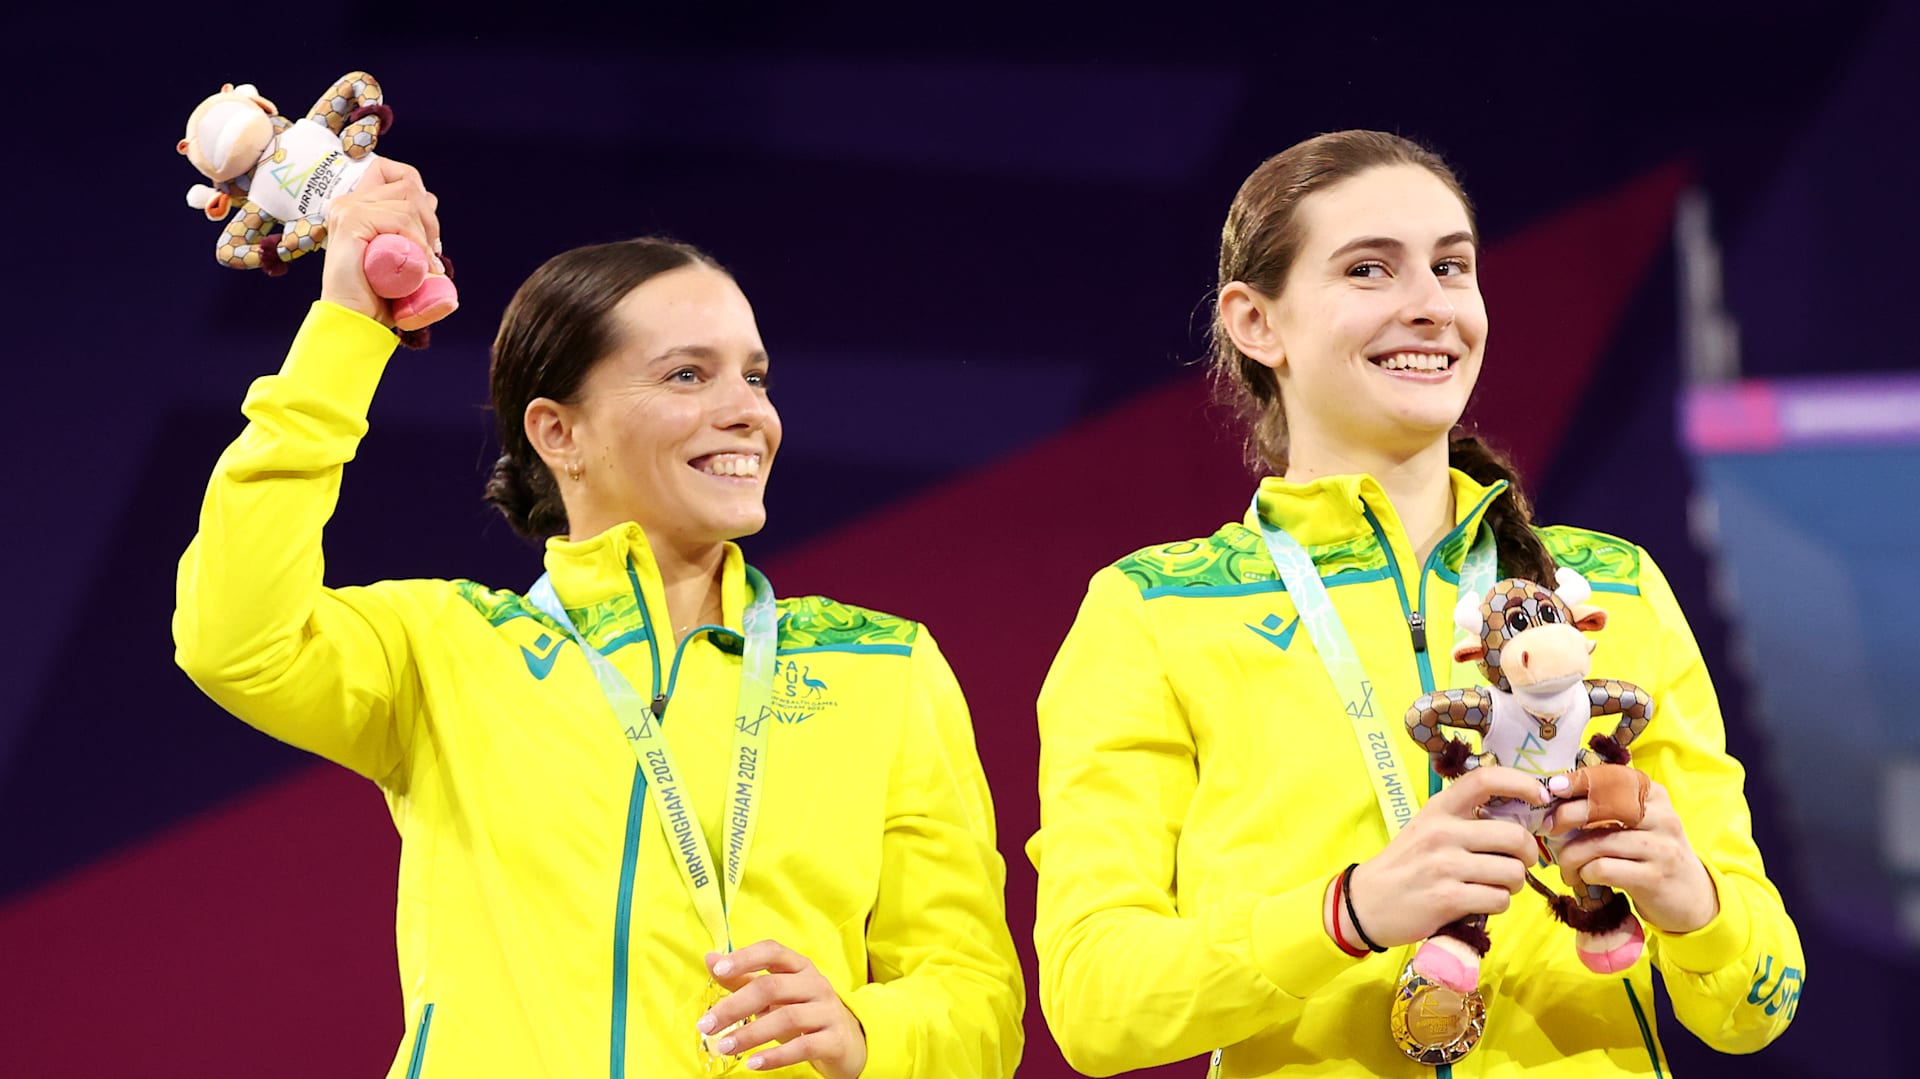 Commonwealth Games 2022 Maddison Keeney and Anabelle Smith win womens 3m synchronised gold